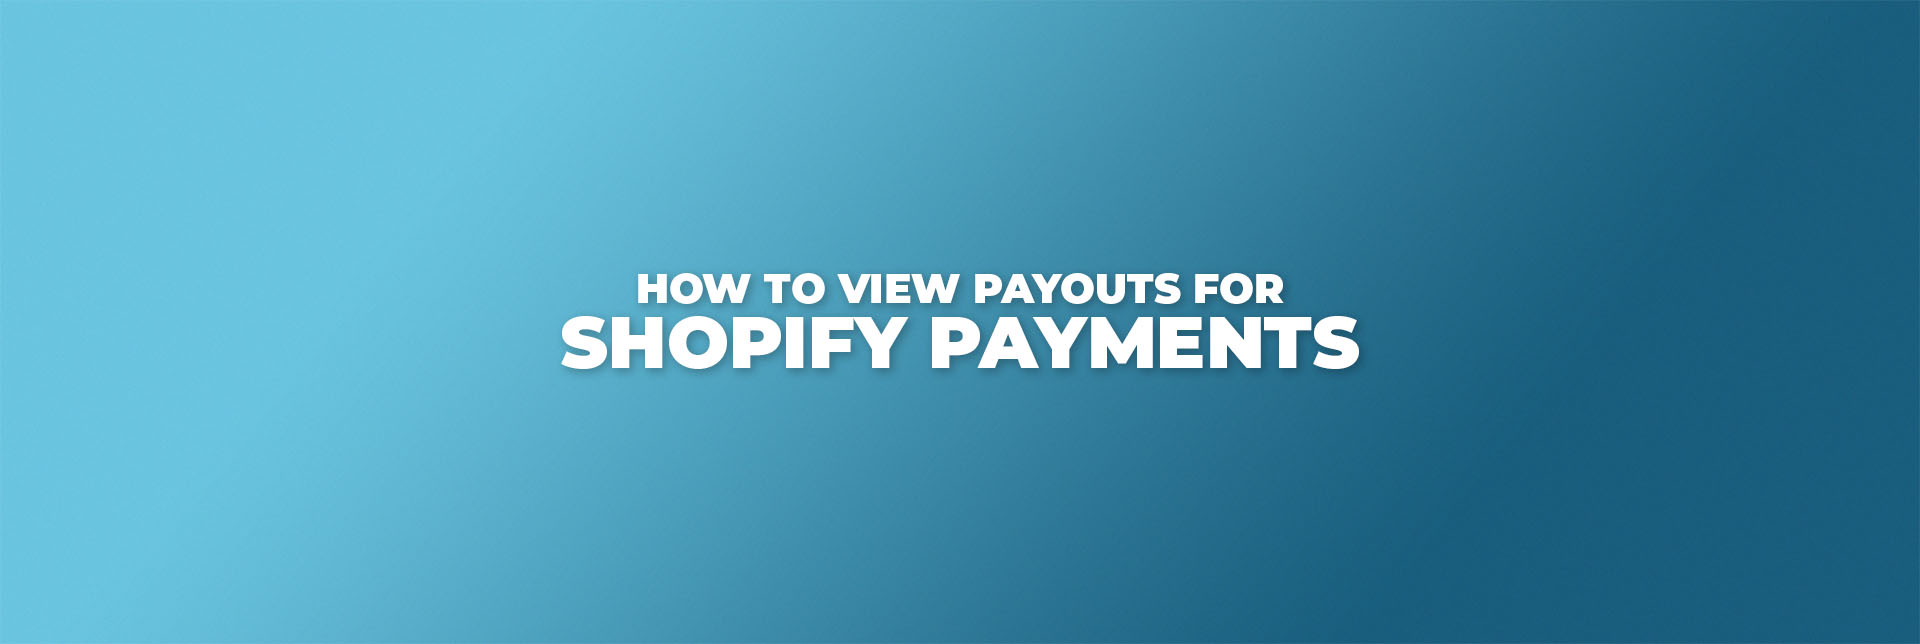 How to View Payouts for Shopify Payments